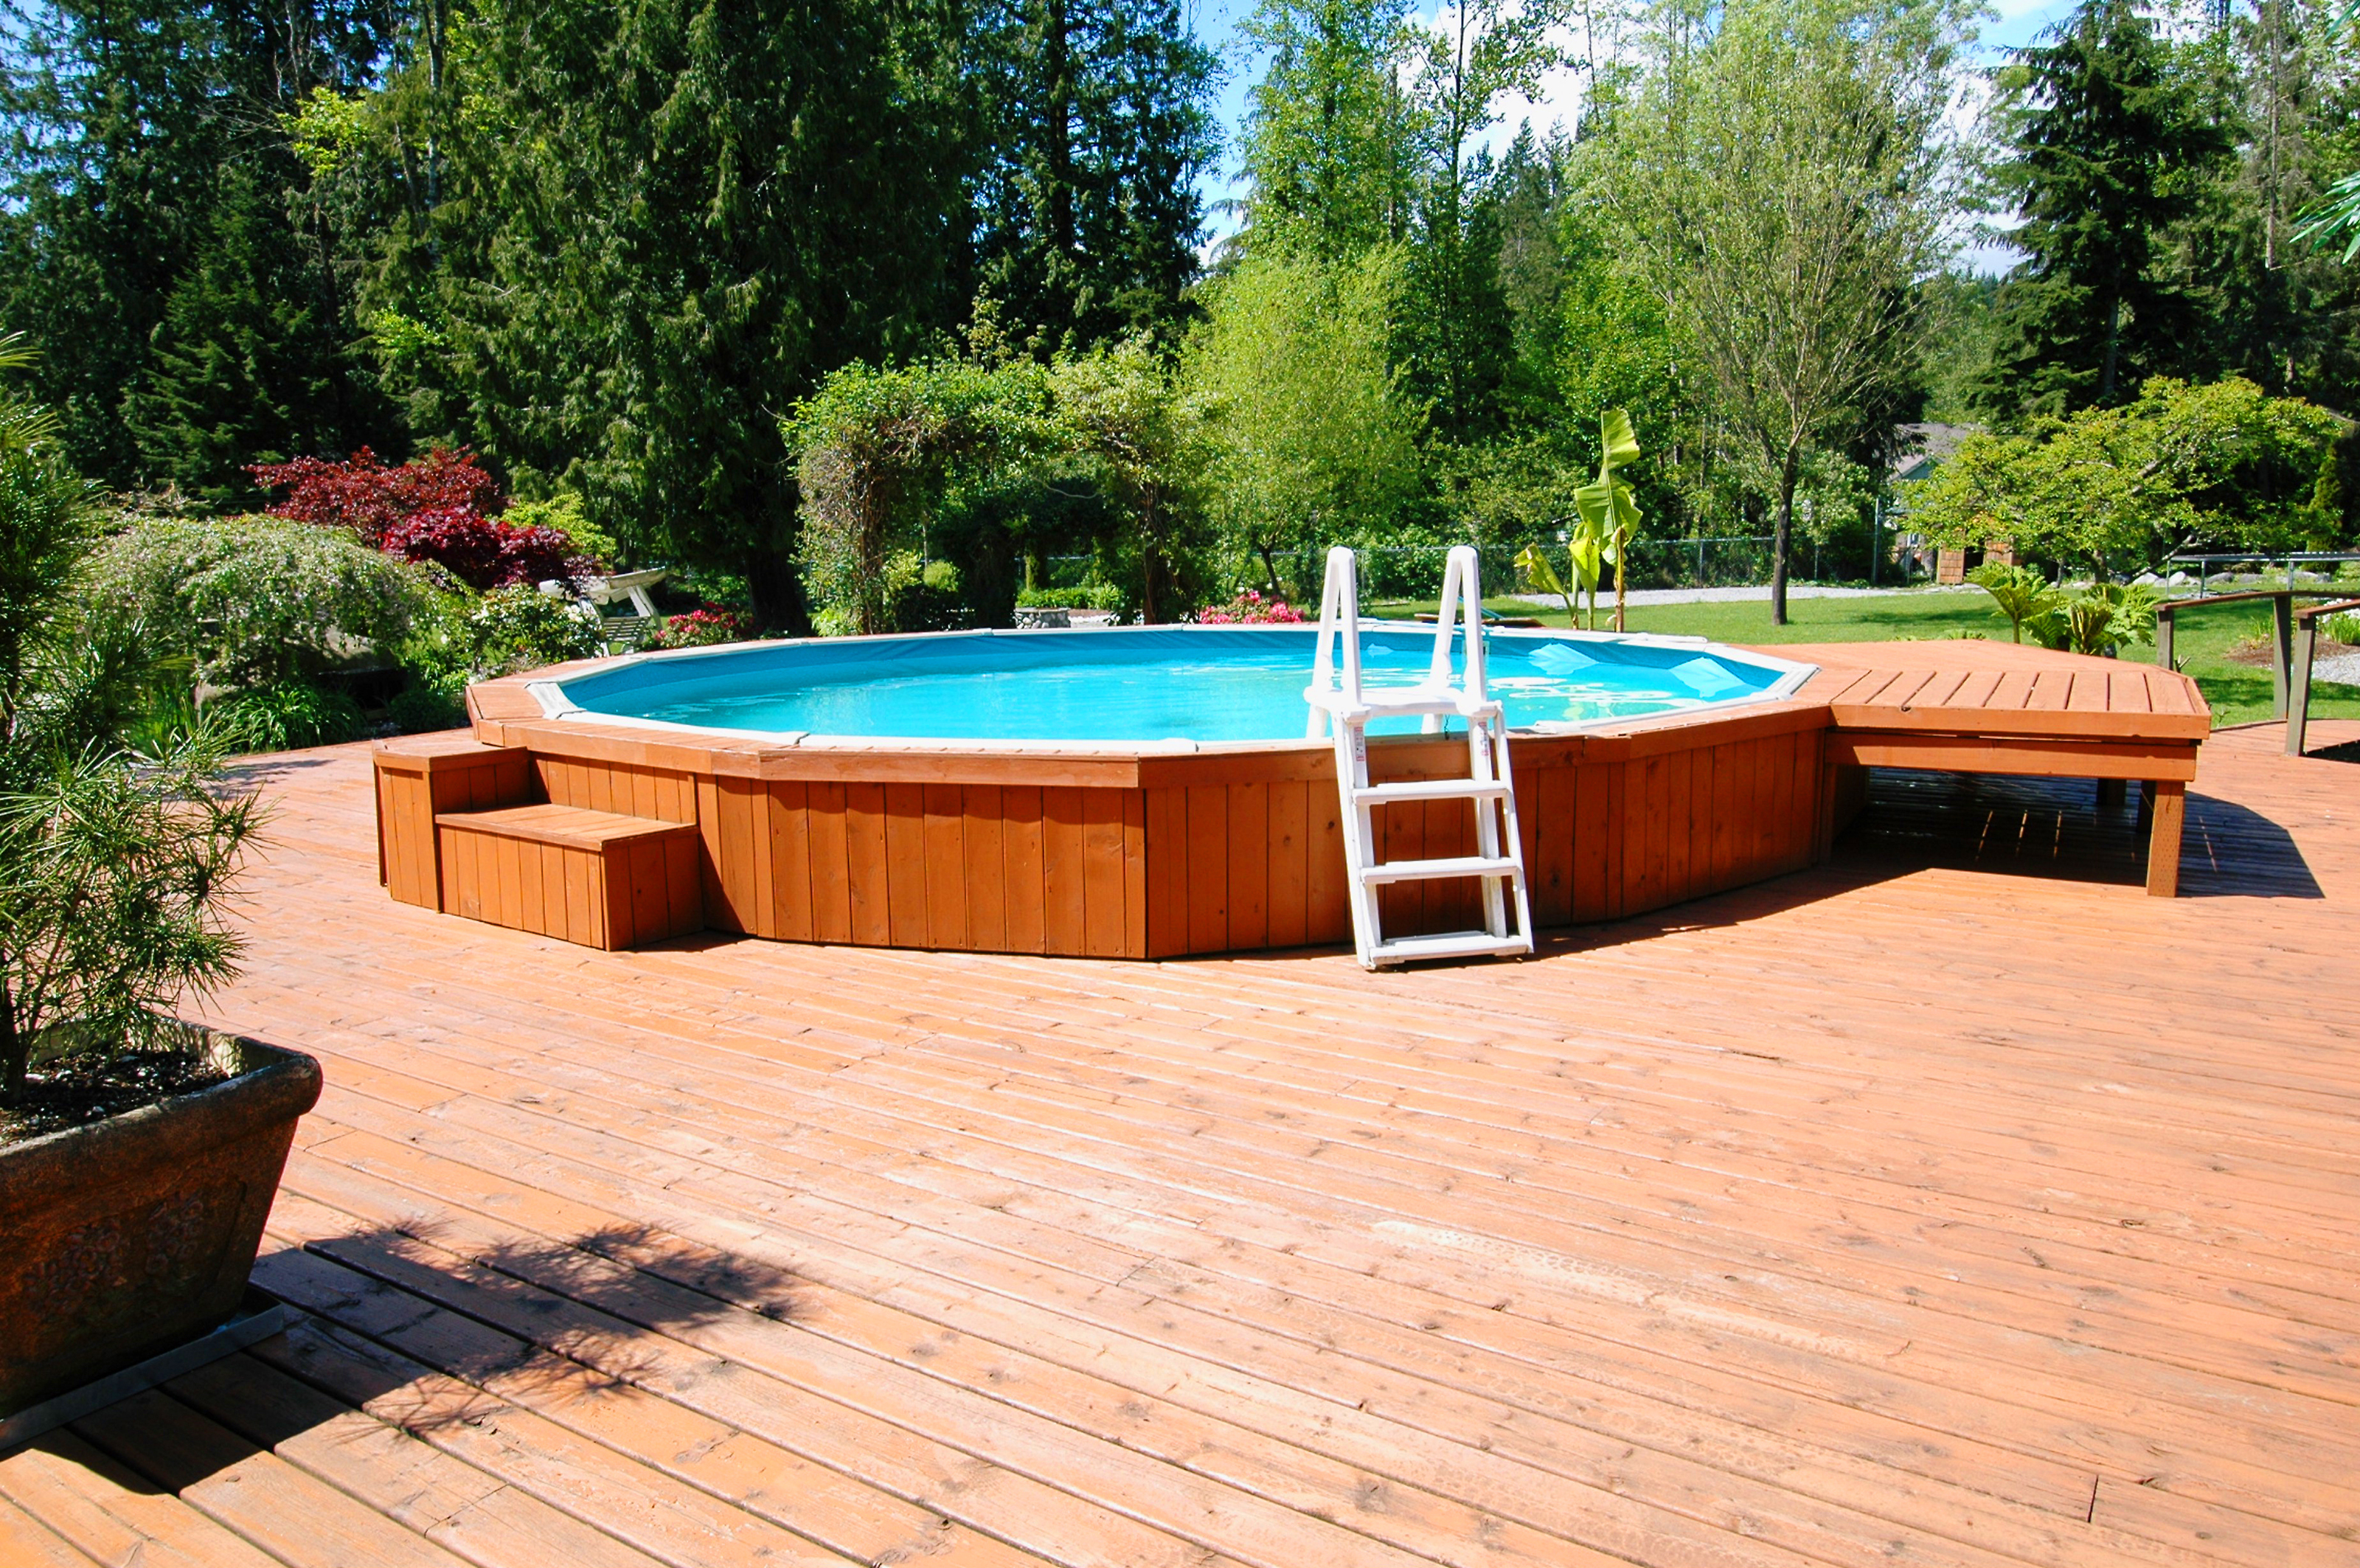 Above ground pool with a wooden deck and surrounding trees.